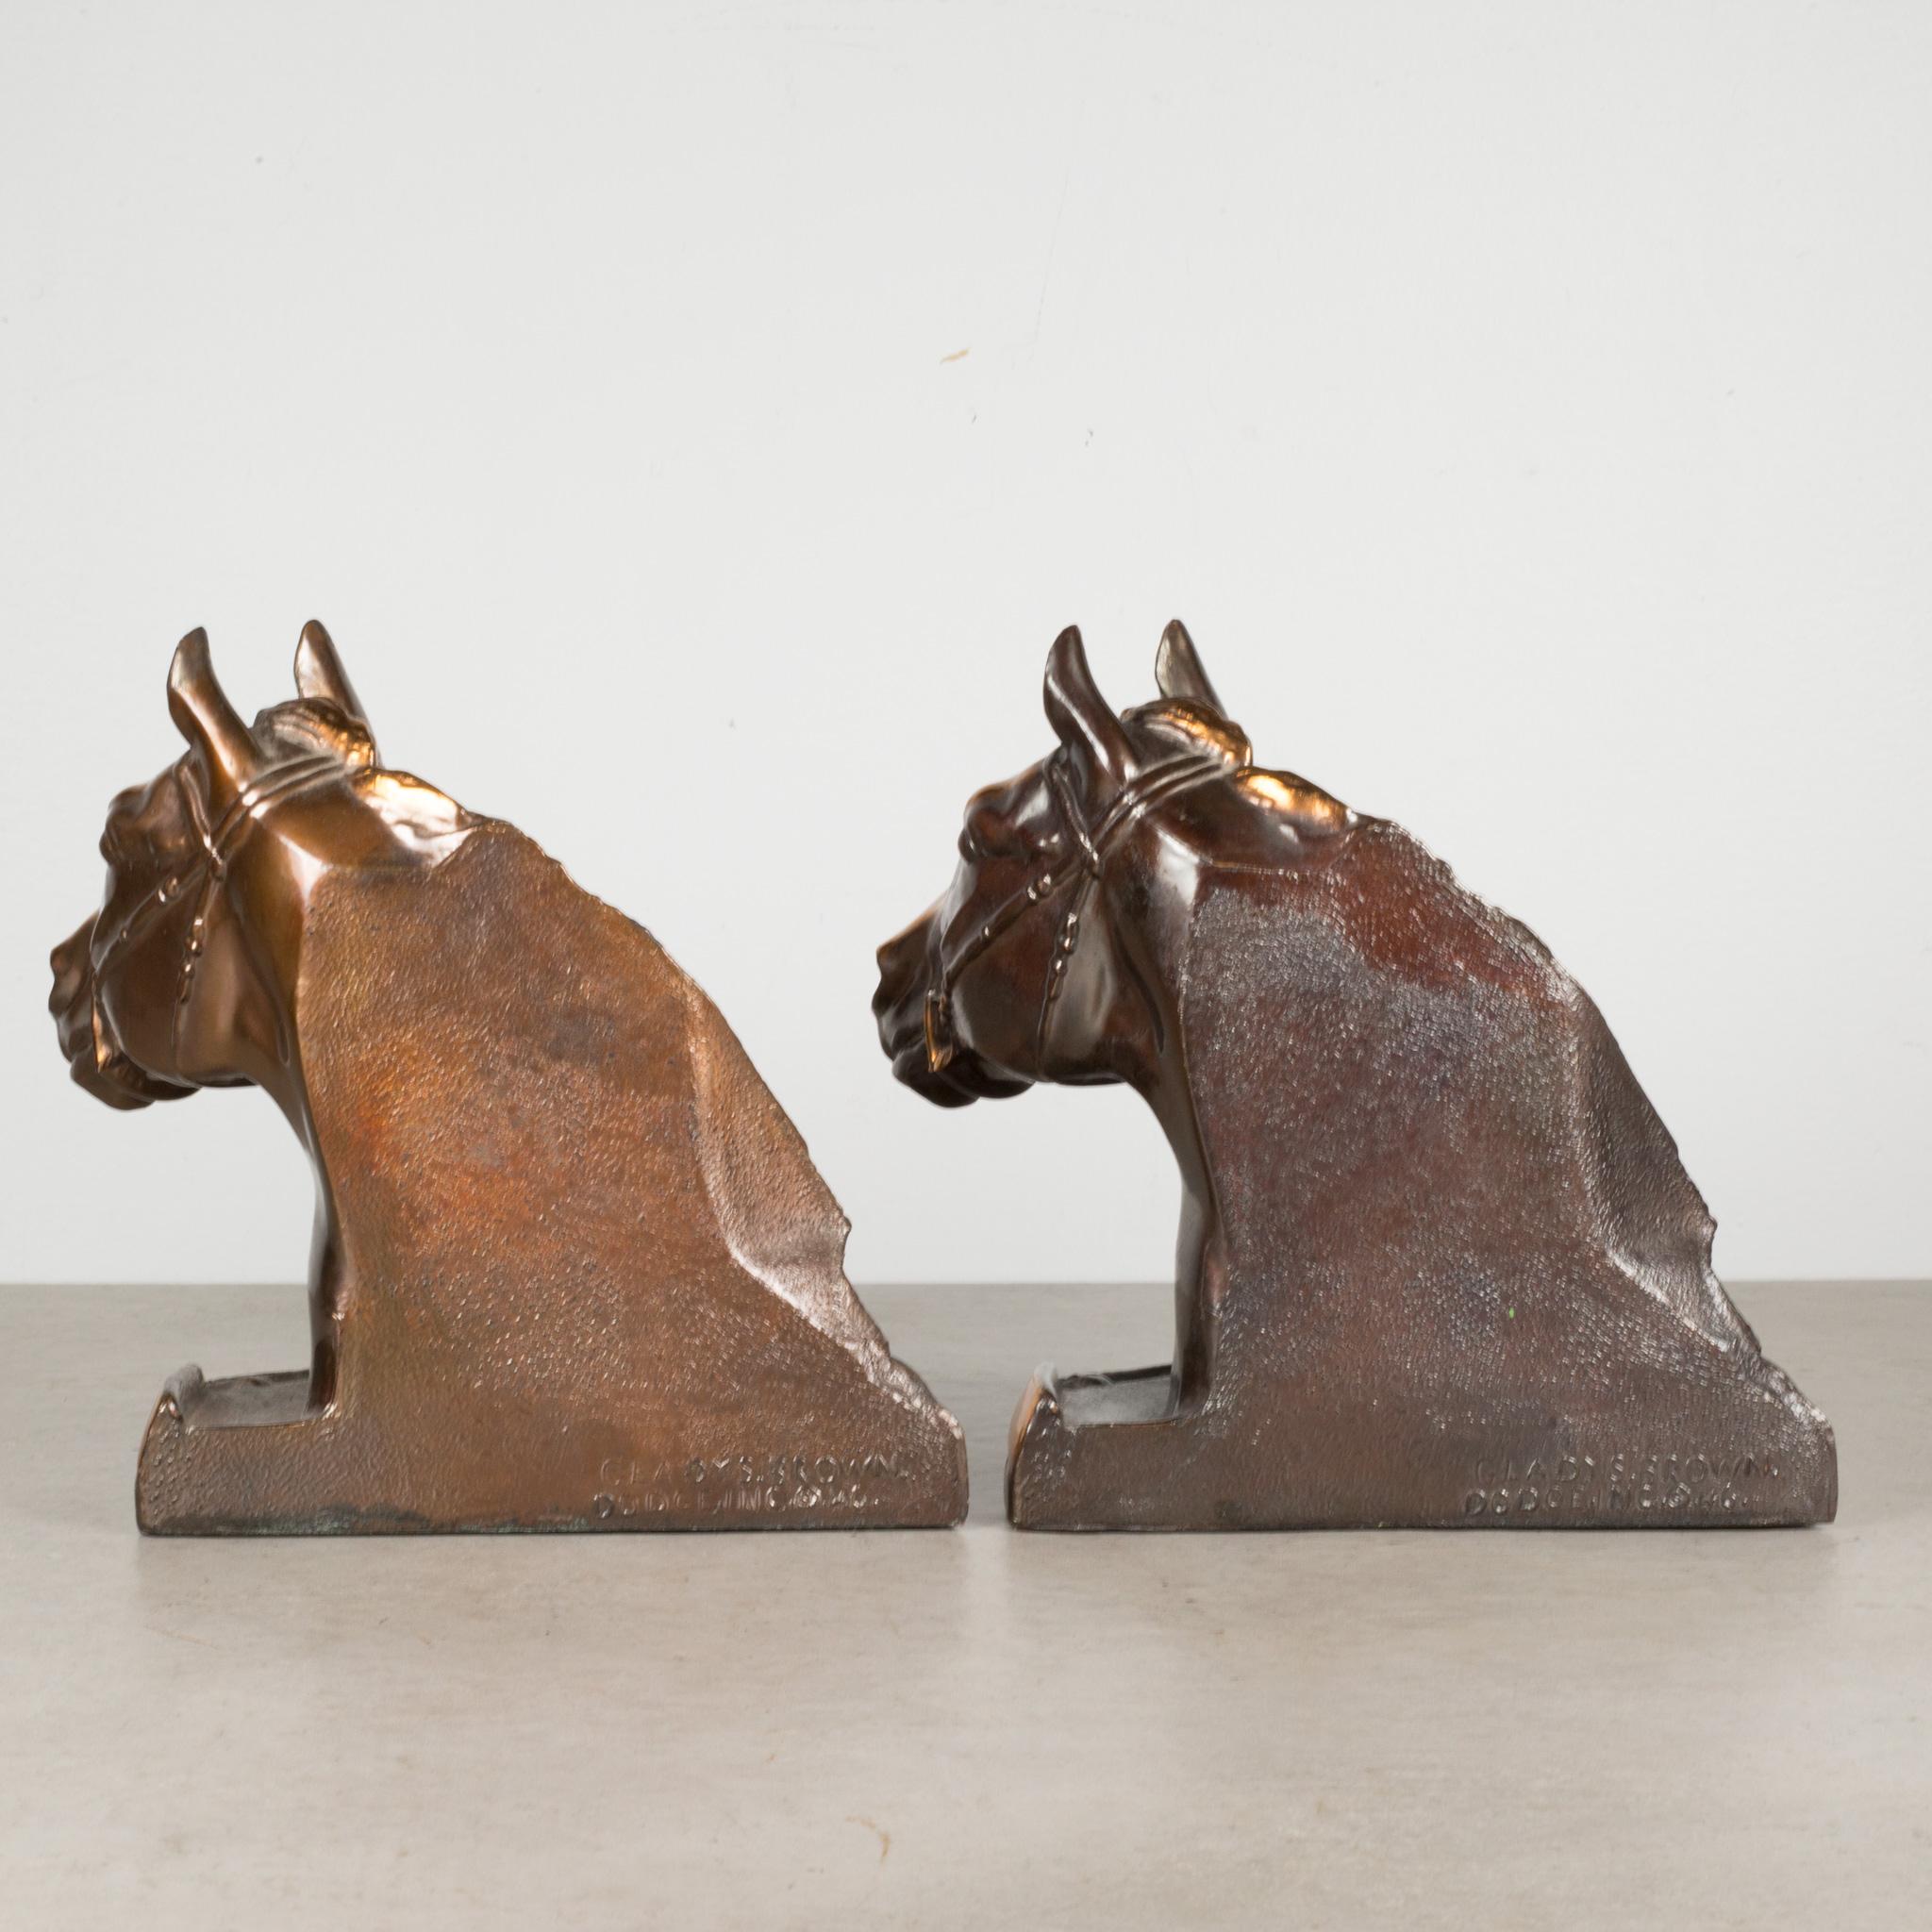 American Bronze Plated Horse Head Bookends by Glady's Brown and Dodge, c.1946